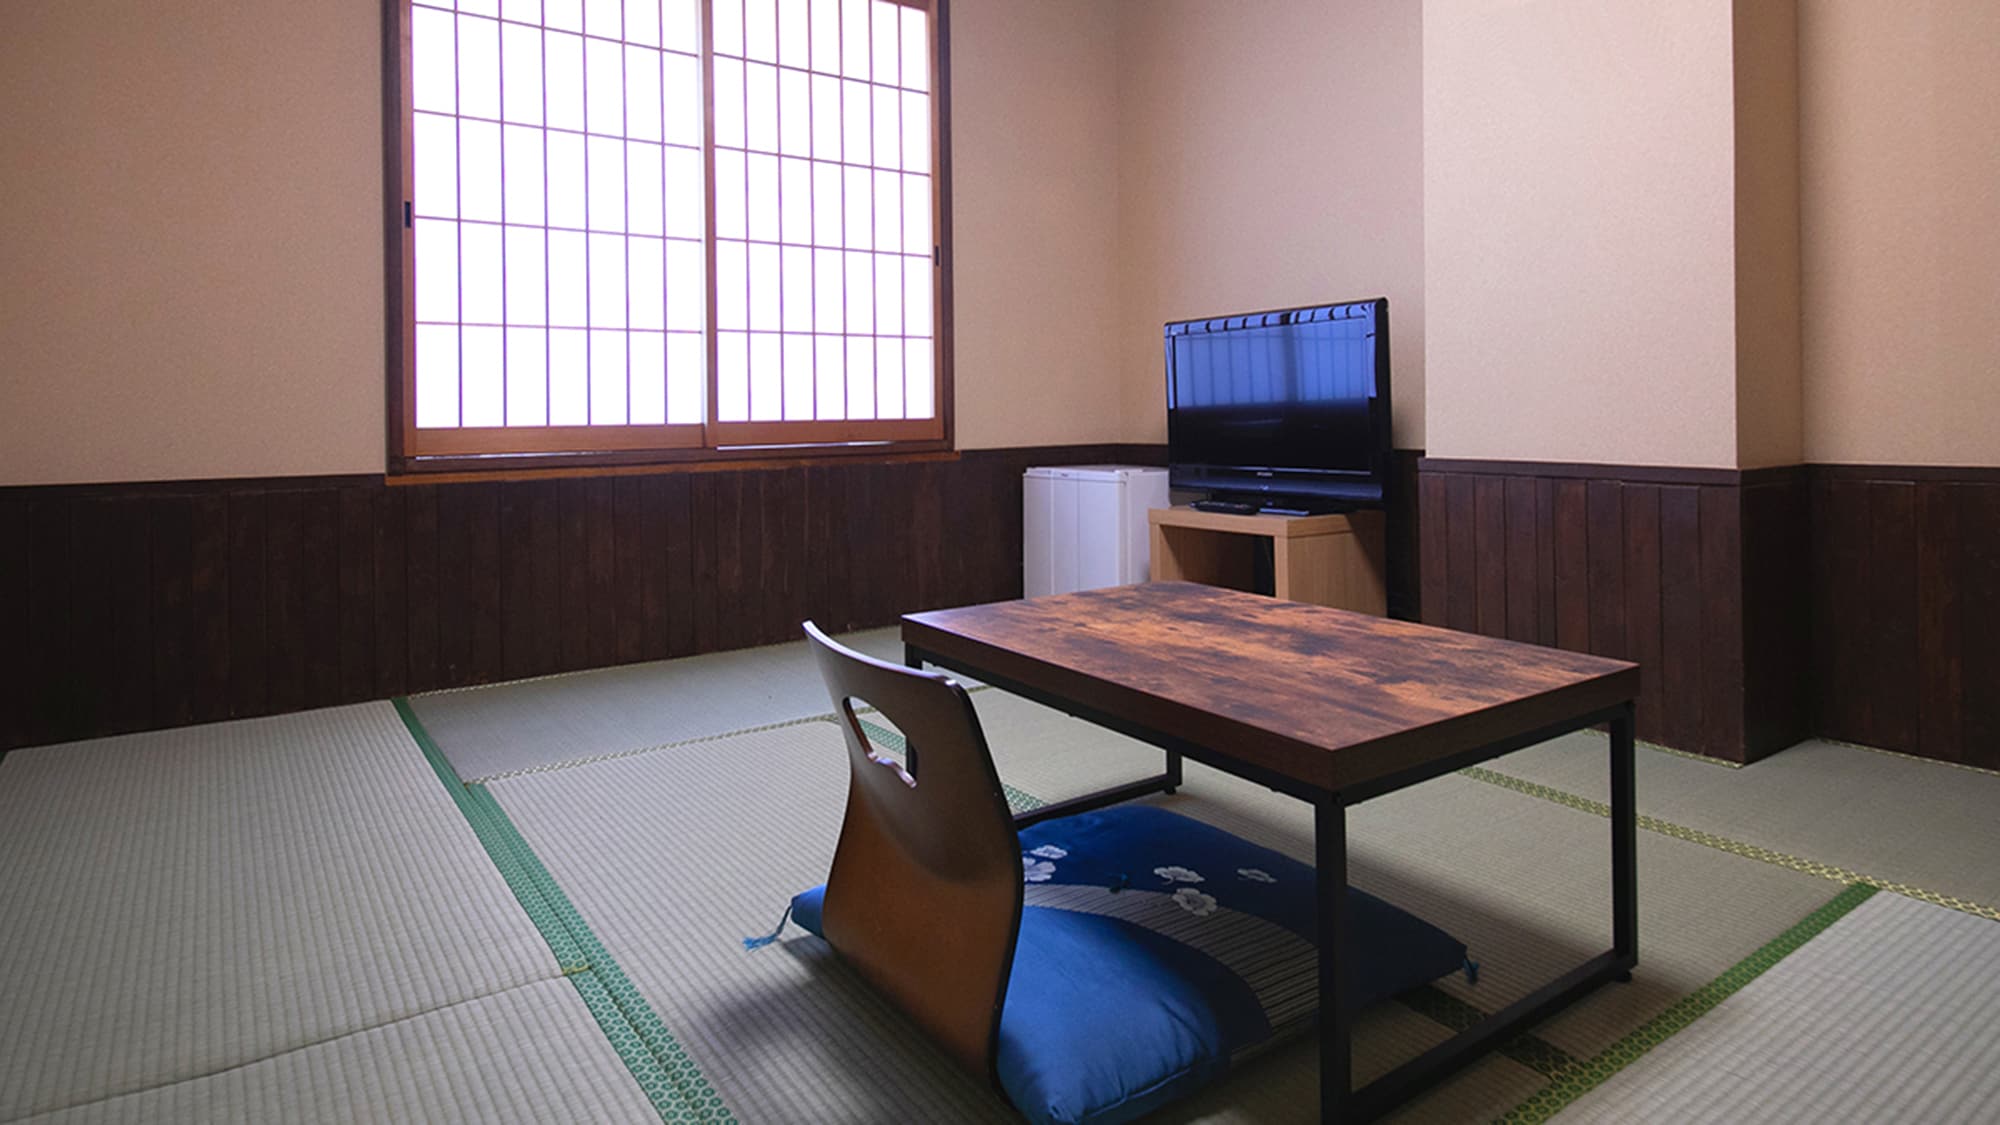 ■ Main building Japanese-style room 6-8 tatami mats with toilet ■